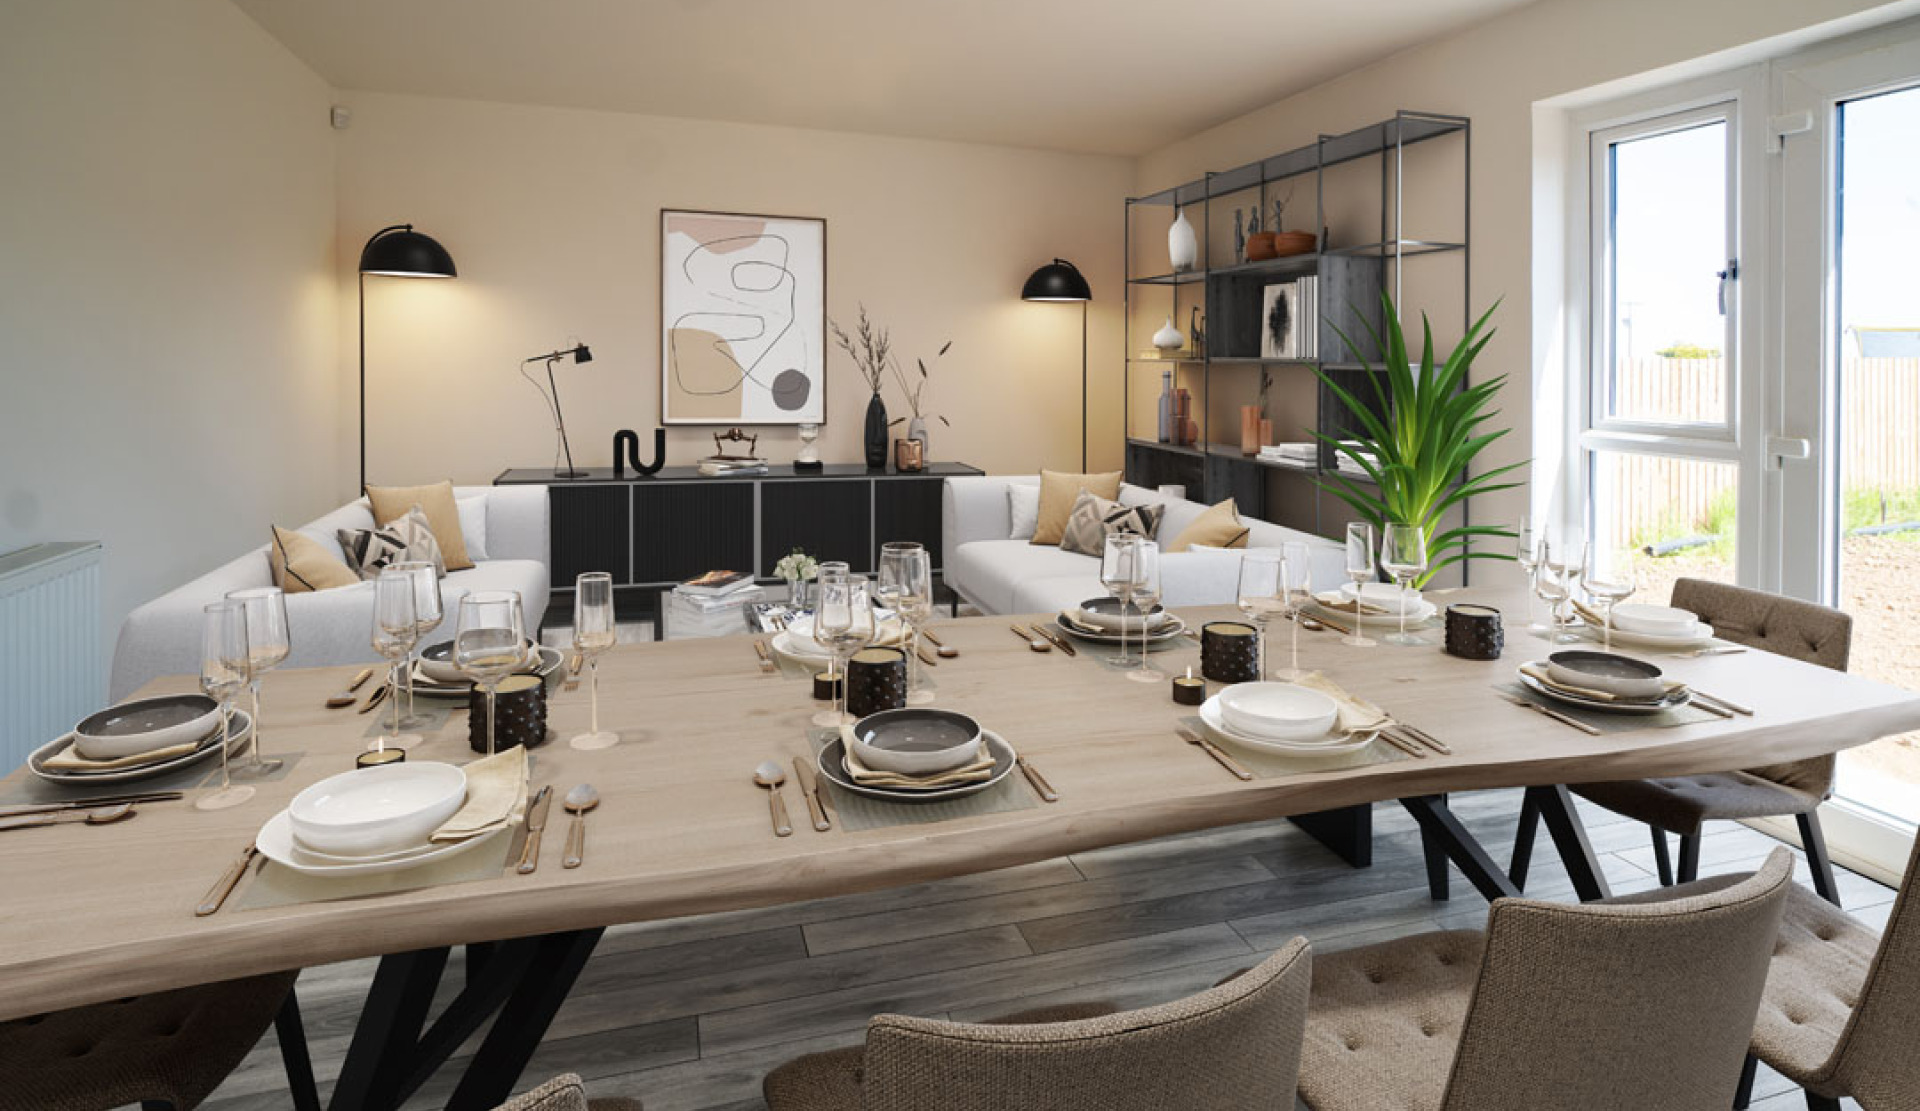 Dining family room